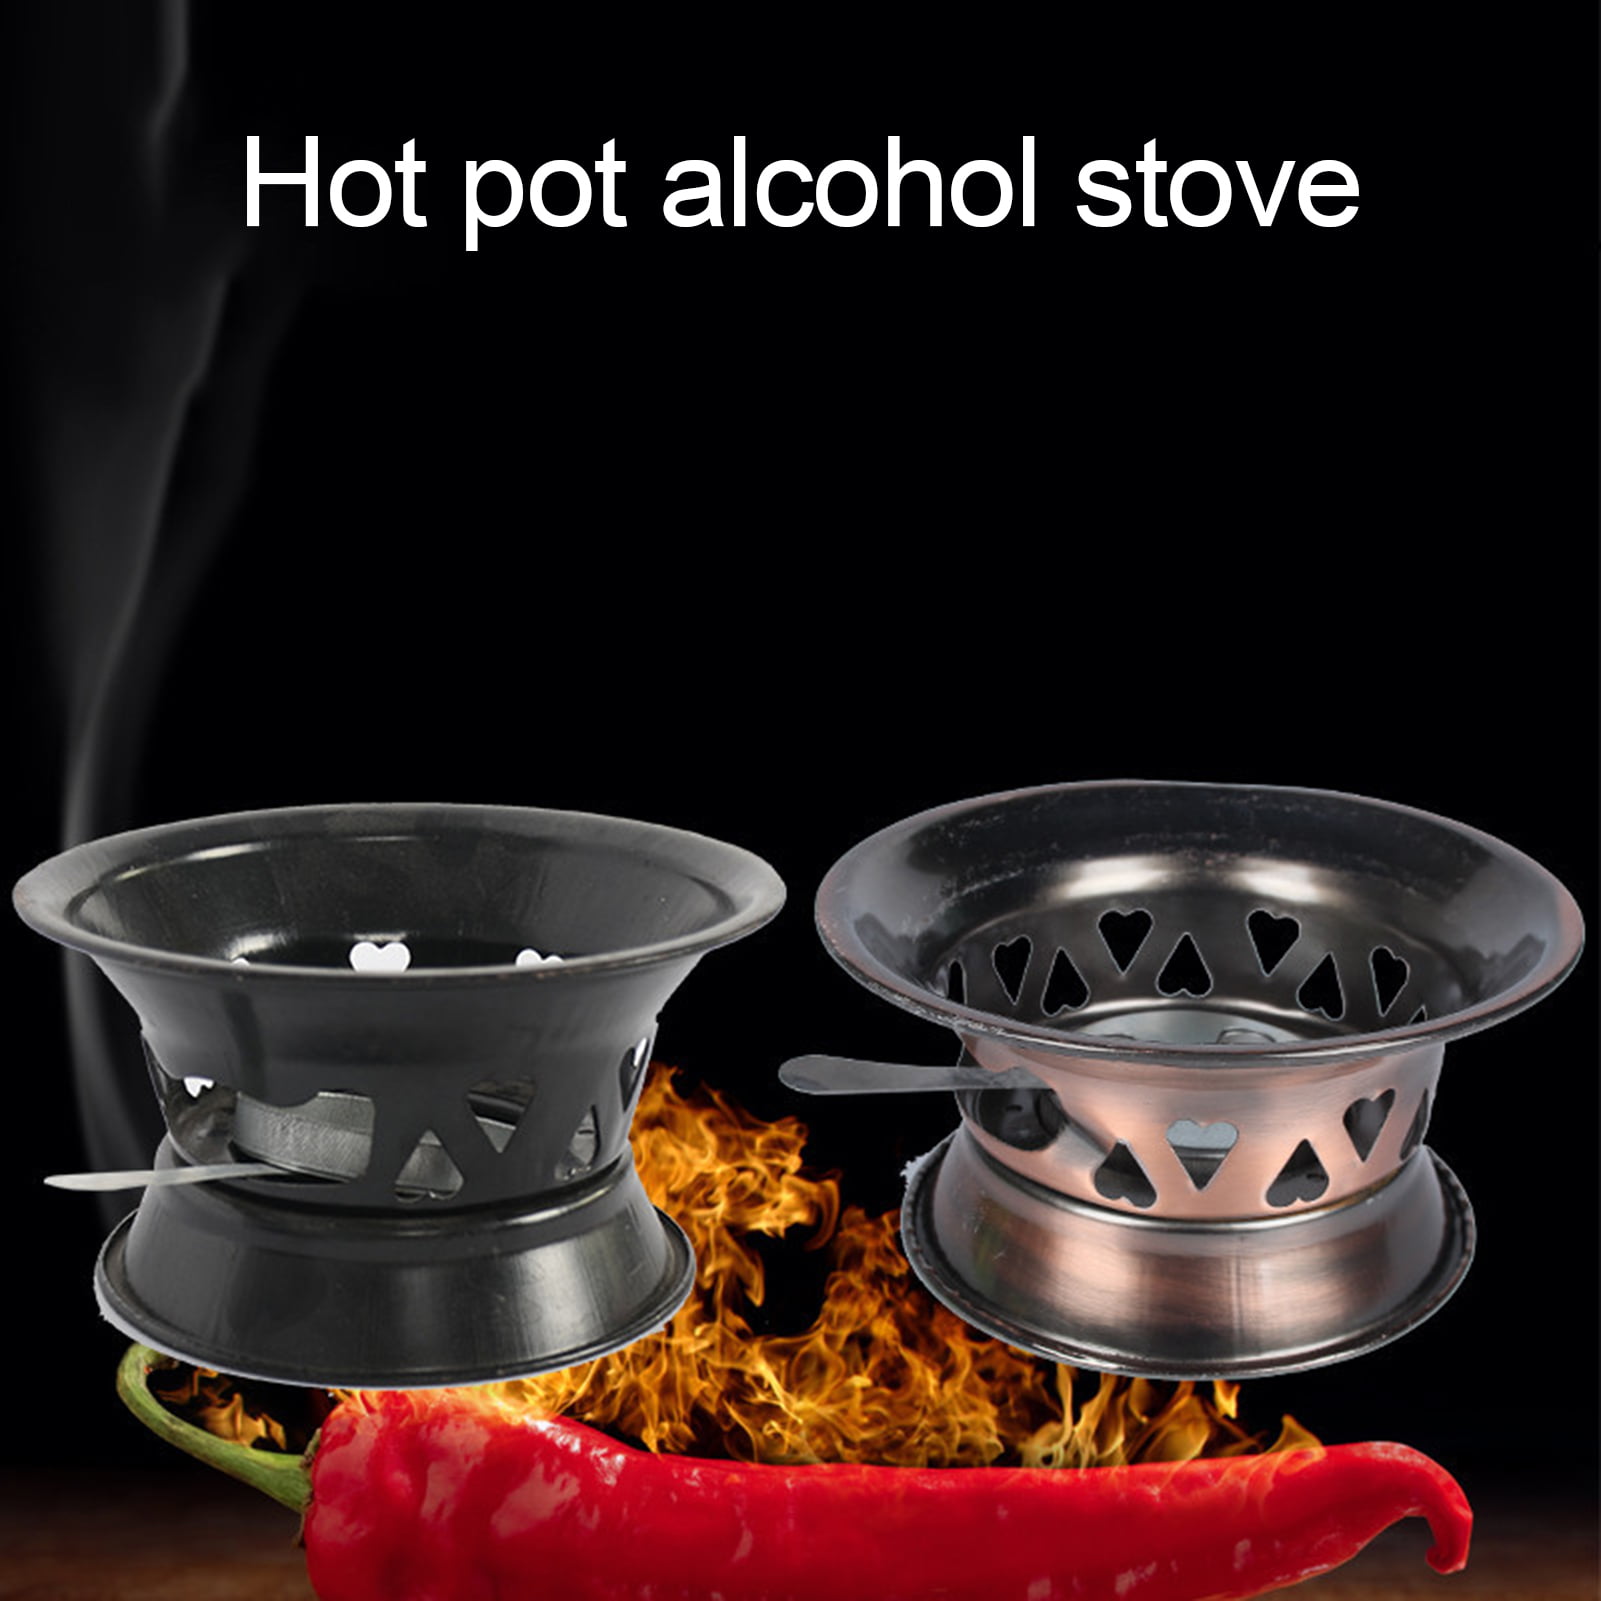 Details about   Portable Alcohol Stove Outdoor Mini Spirit Burner Cooker Camping Cooking 